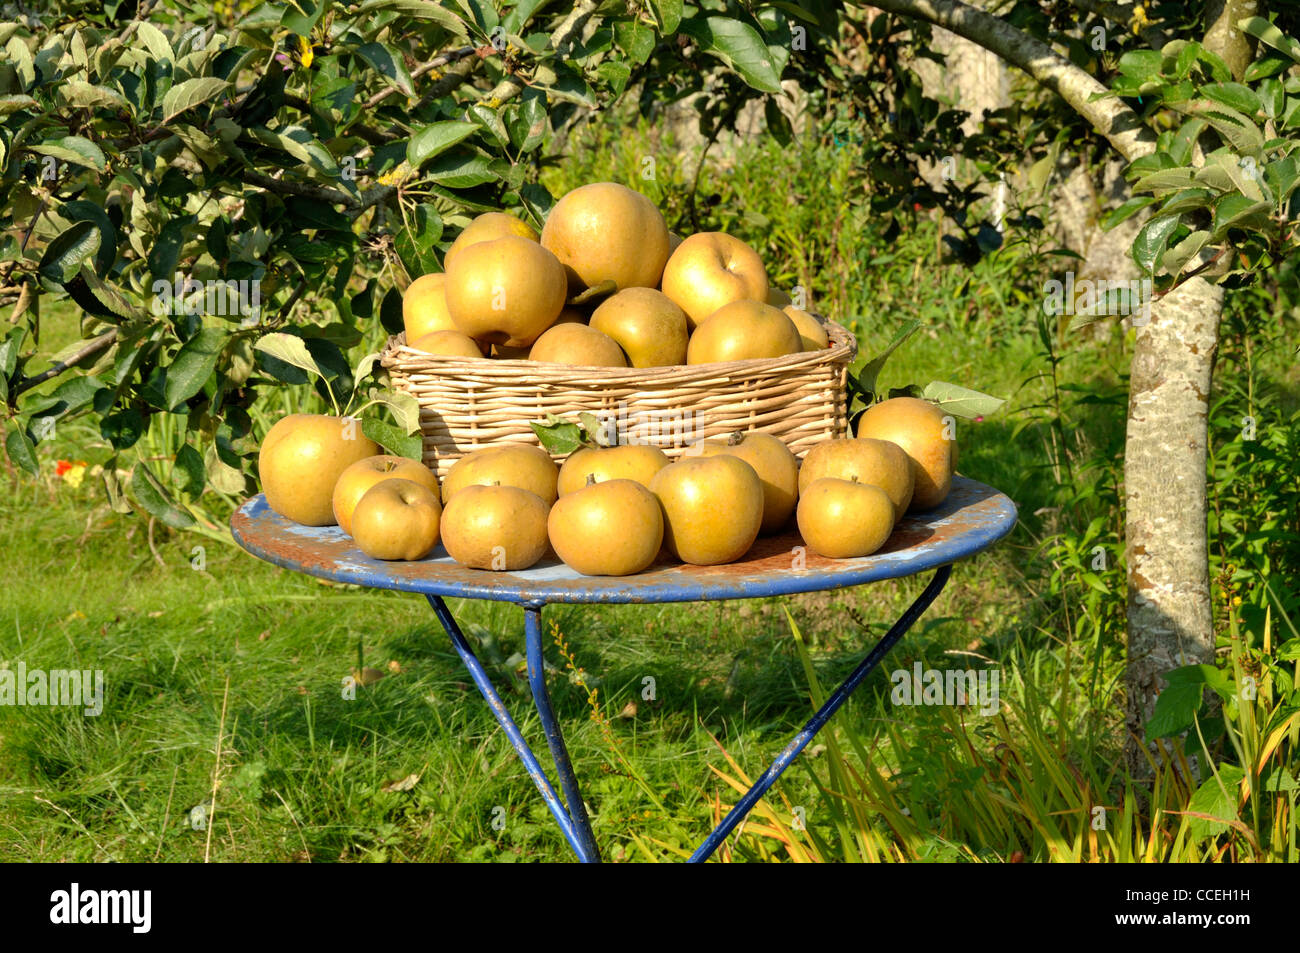 Russet  apples (Reinette Grise du Canada) on the garden table. Stock Photo